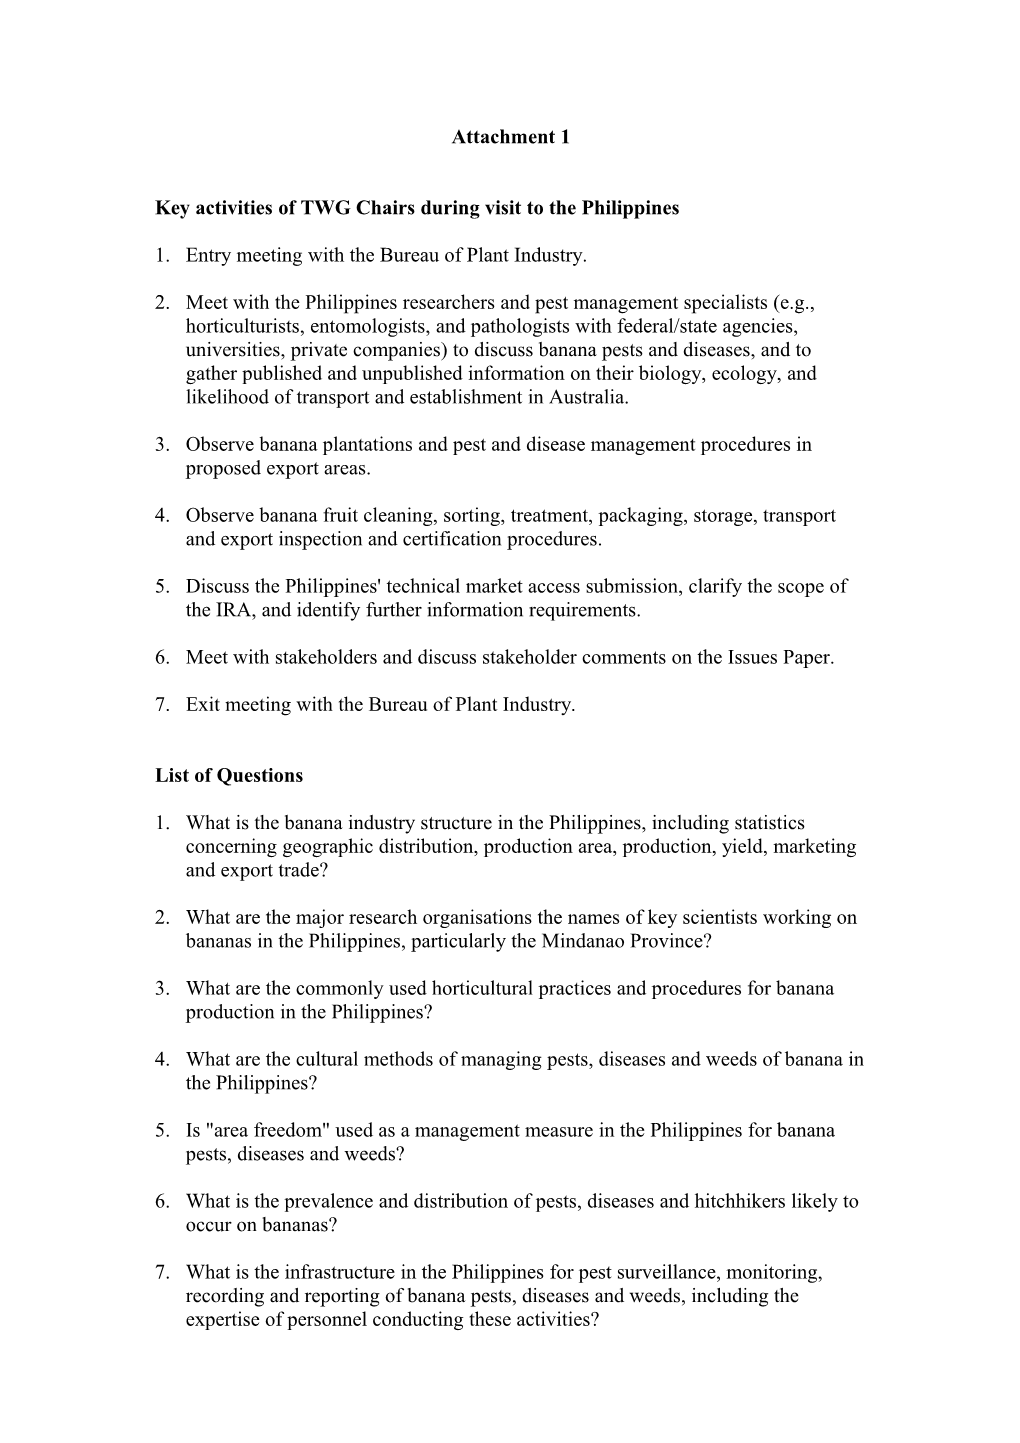 Terms of Reference for RAP Members Visit to the Philippines